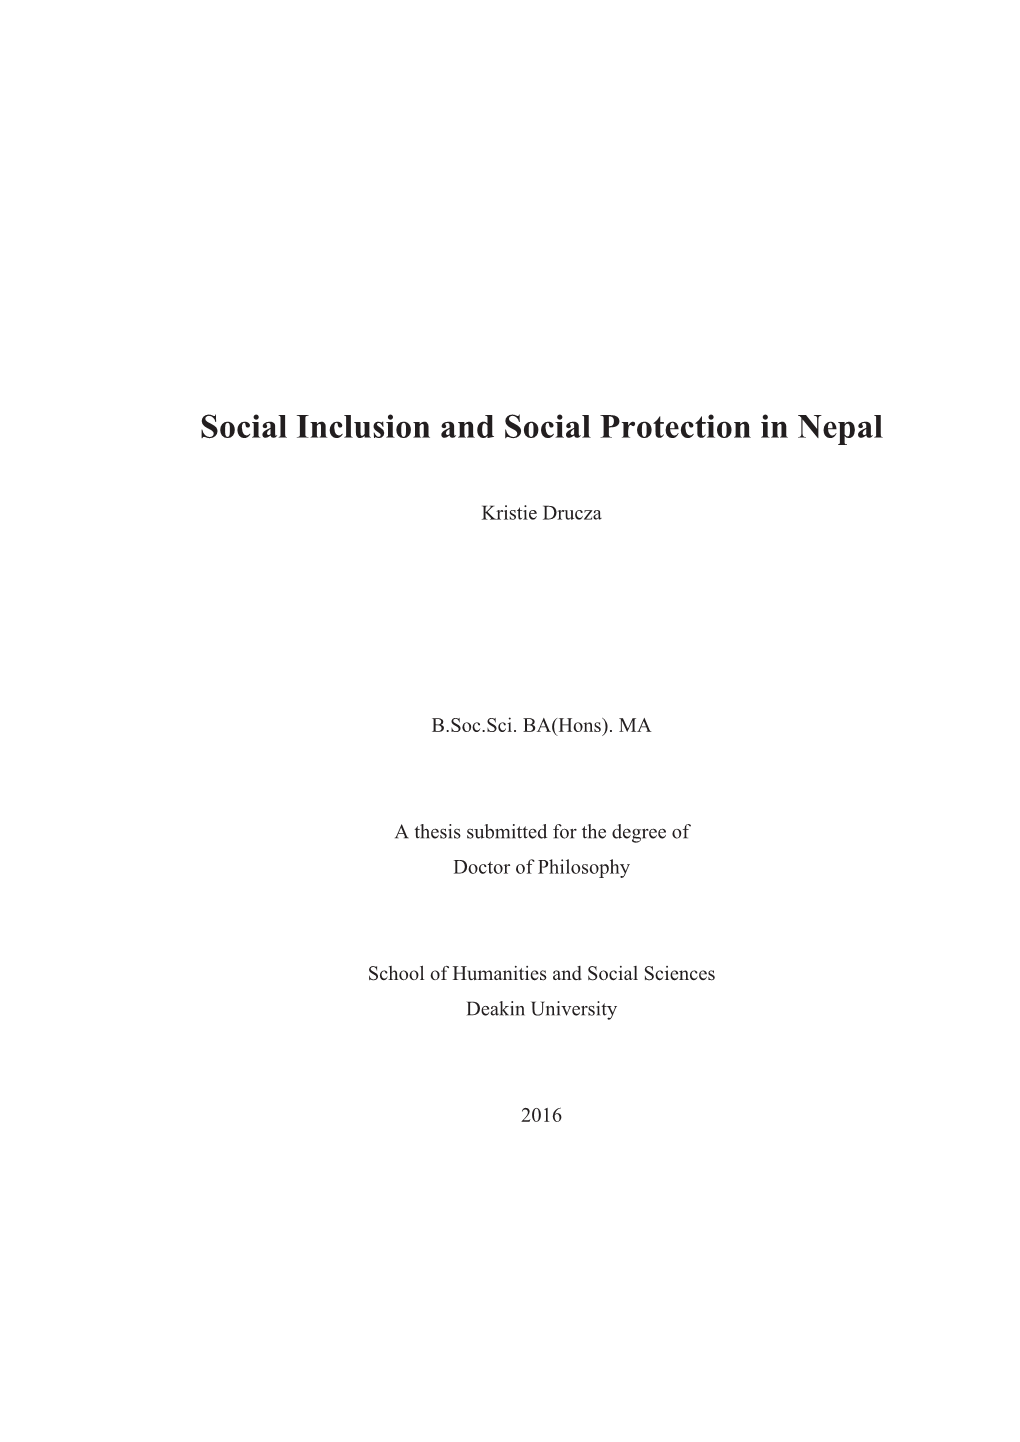 Social Inclusion and Social Protection in Nepal